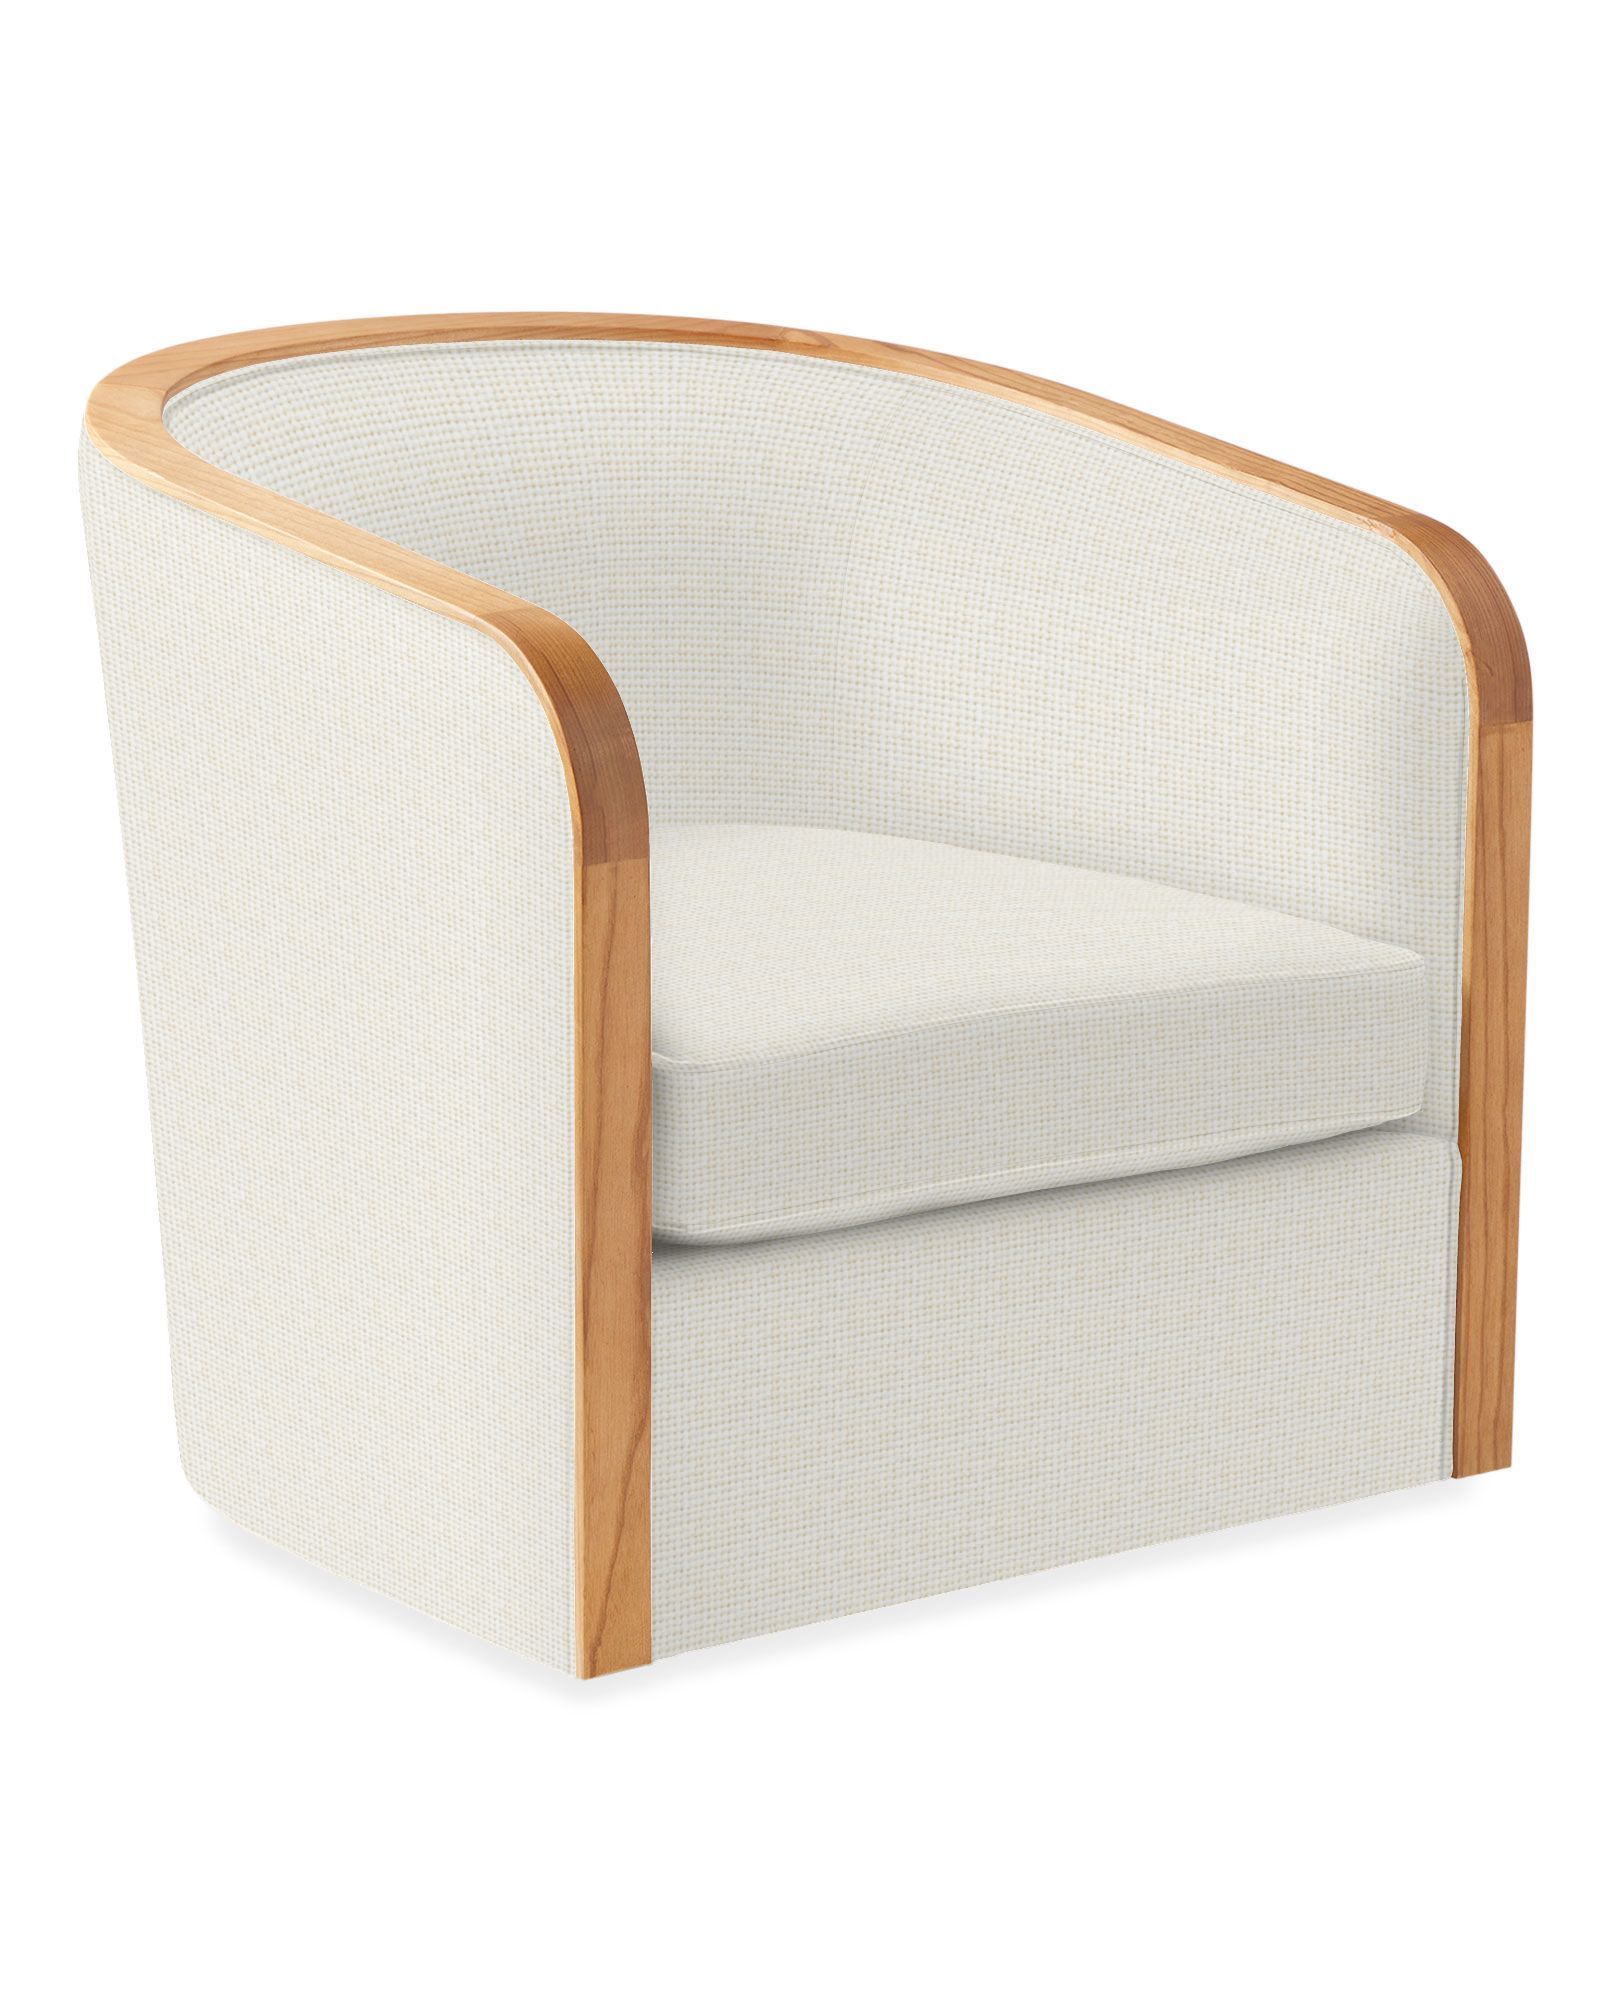 Bleeker Swivel Chair | Serena and Lily